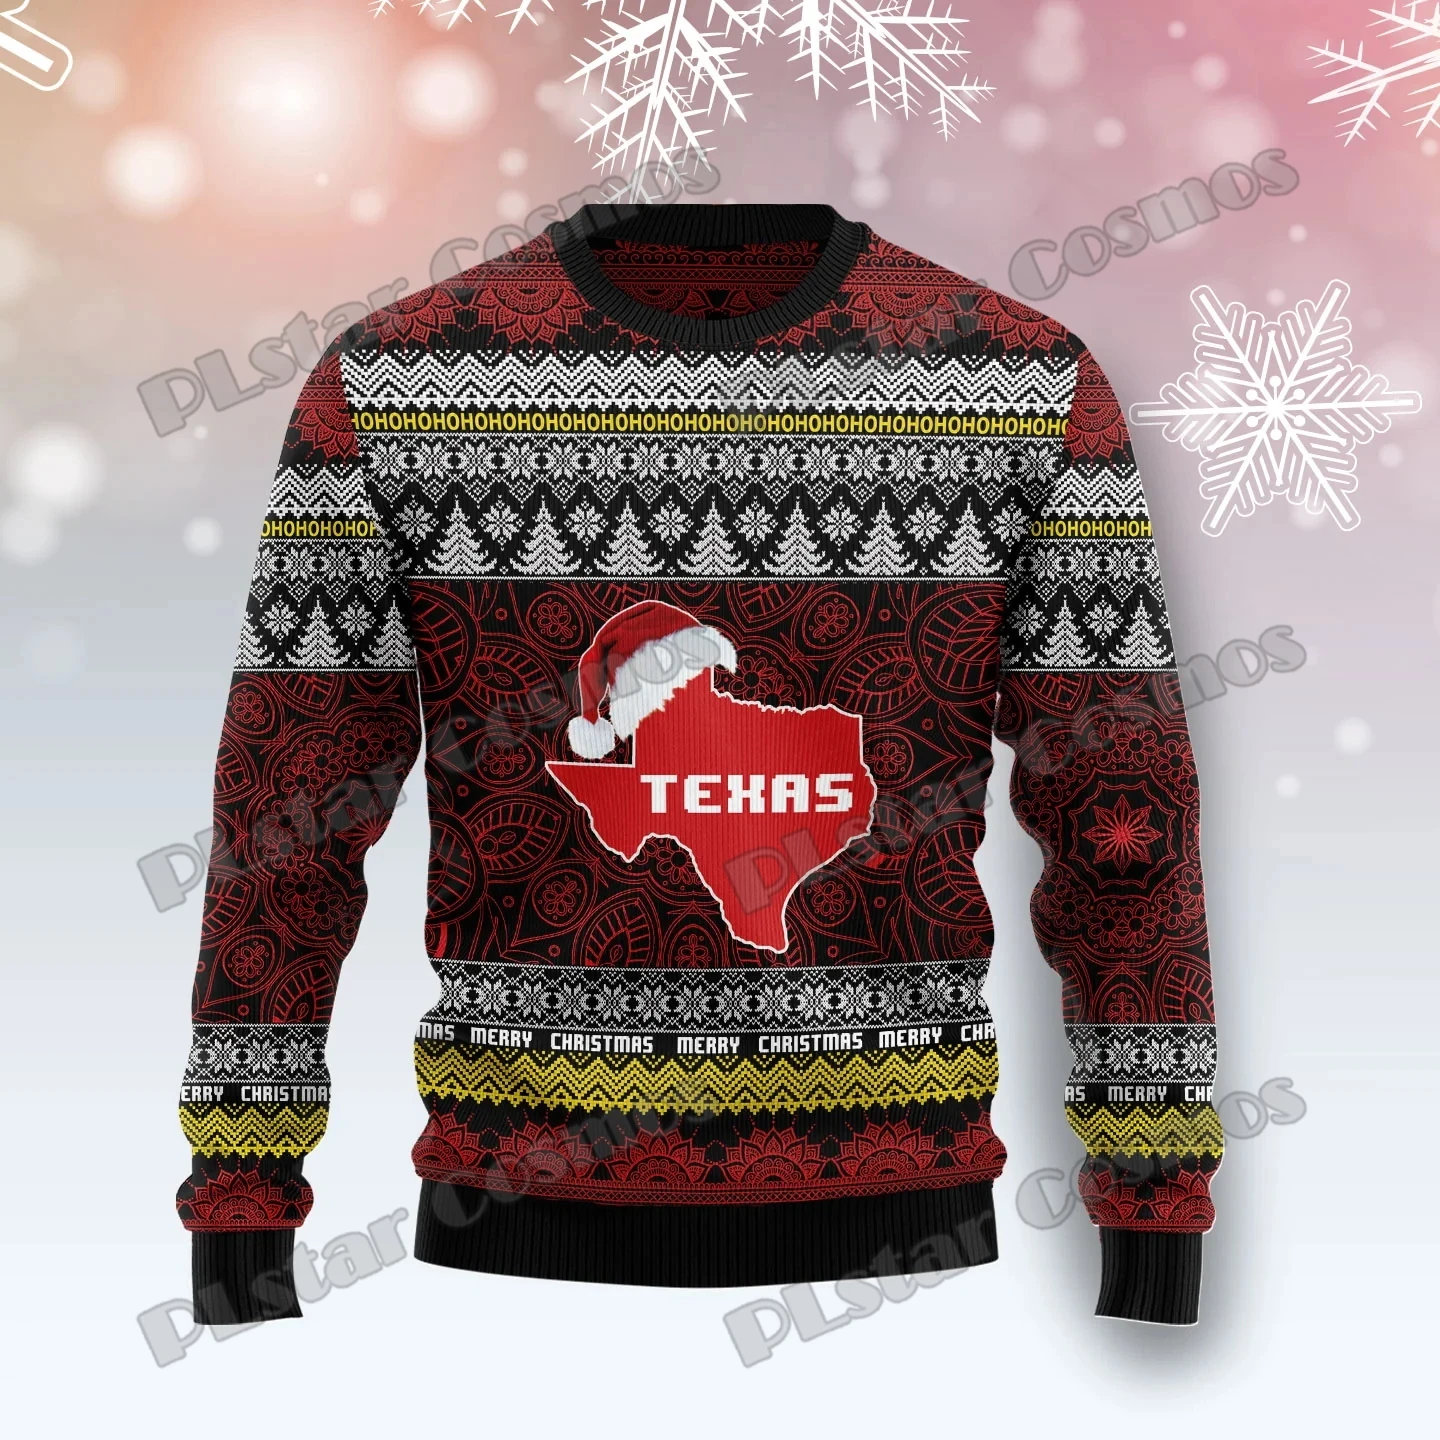 PLstar Cosmos Texas Mandala 3D Printed Fashion Men's Ugly Christmas Sweater Winter Unisex Casual Knit Pullover Sweater MYY07